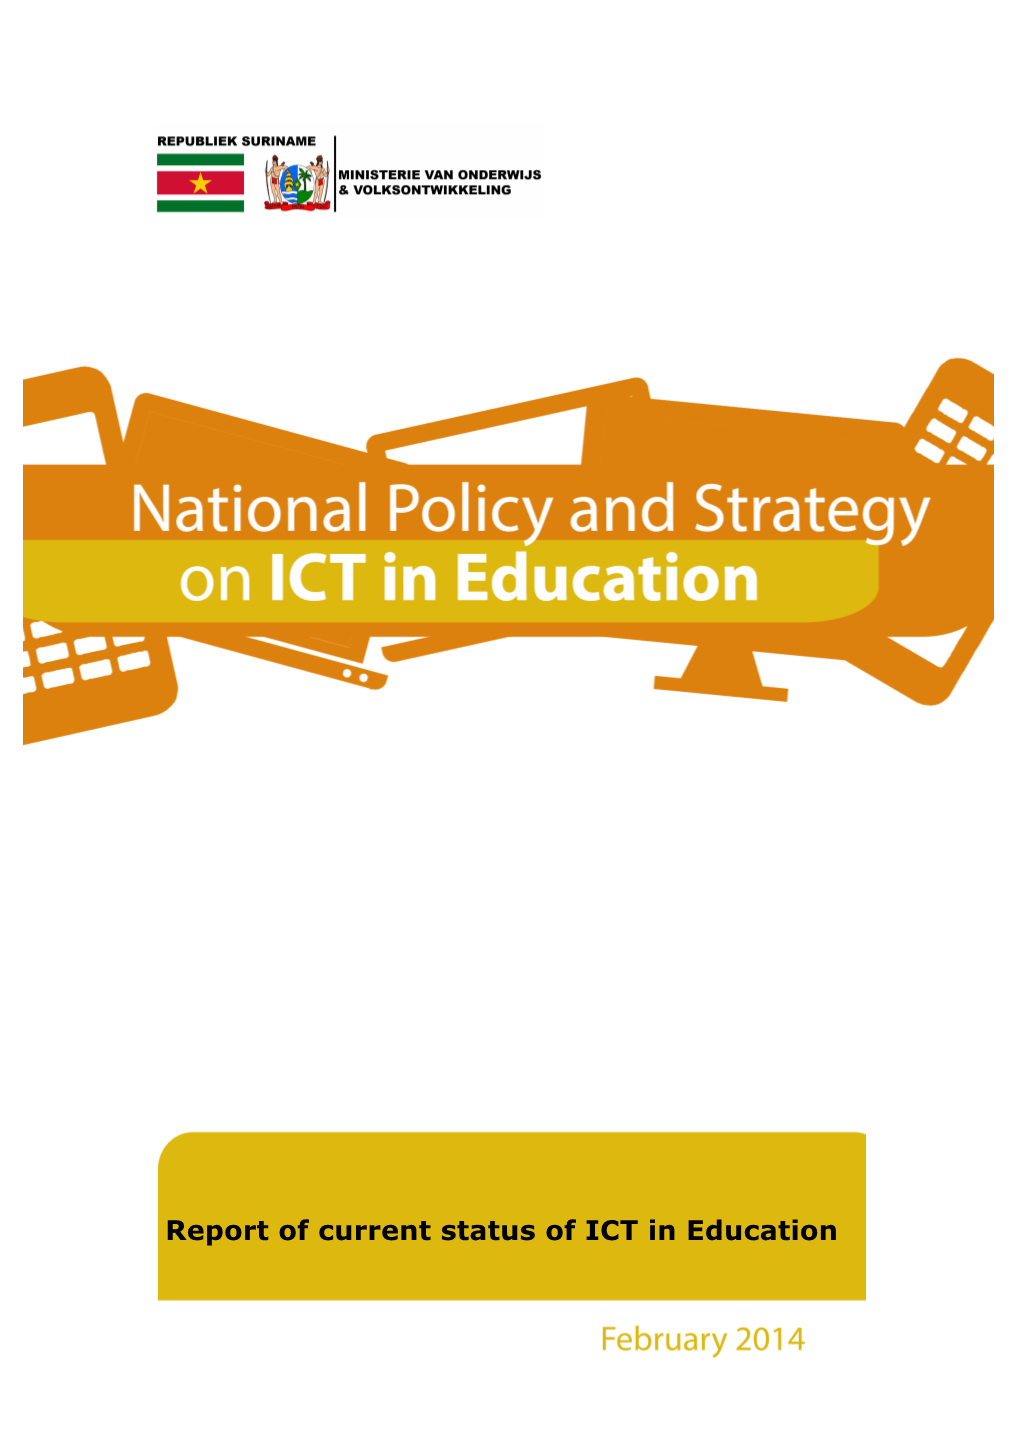 Report of Current Status of ICT in Education